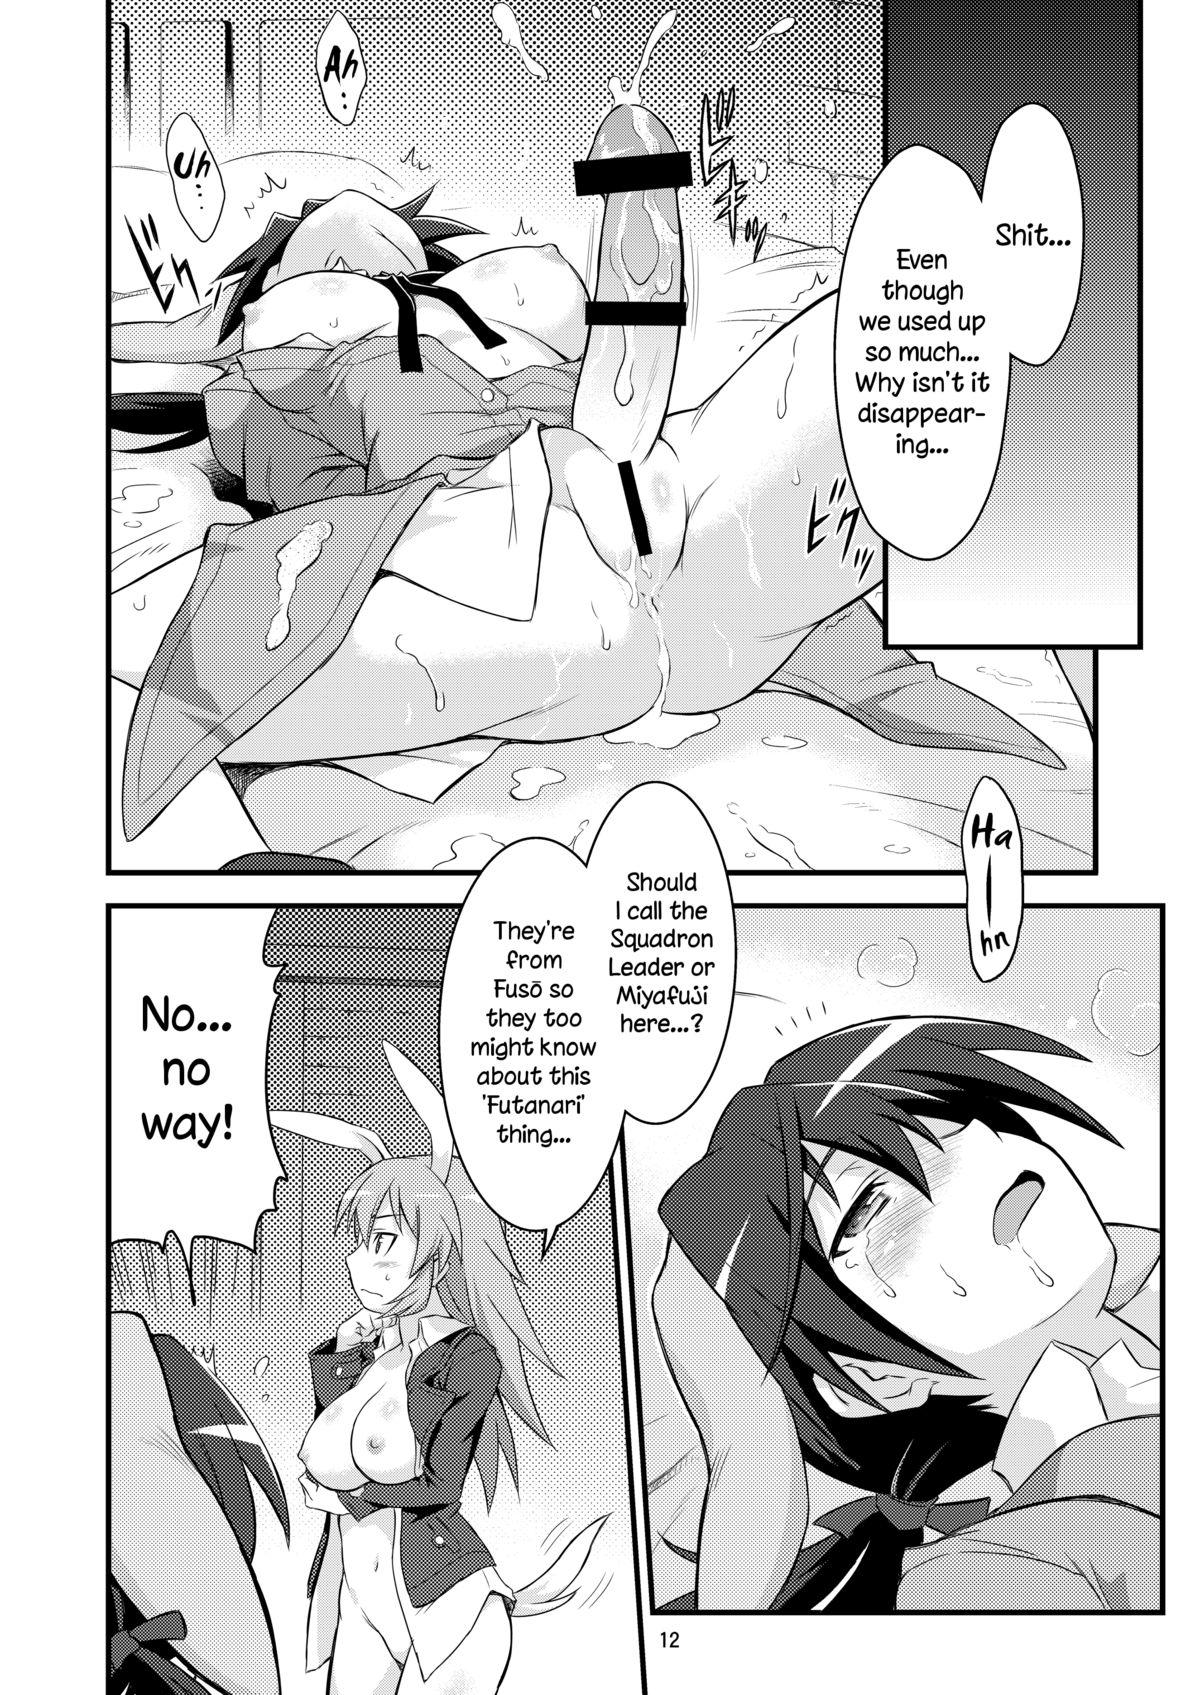 Caliente Shir and Gert in Big Trouble - Strike witches Spreading - Page 12